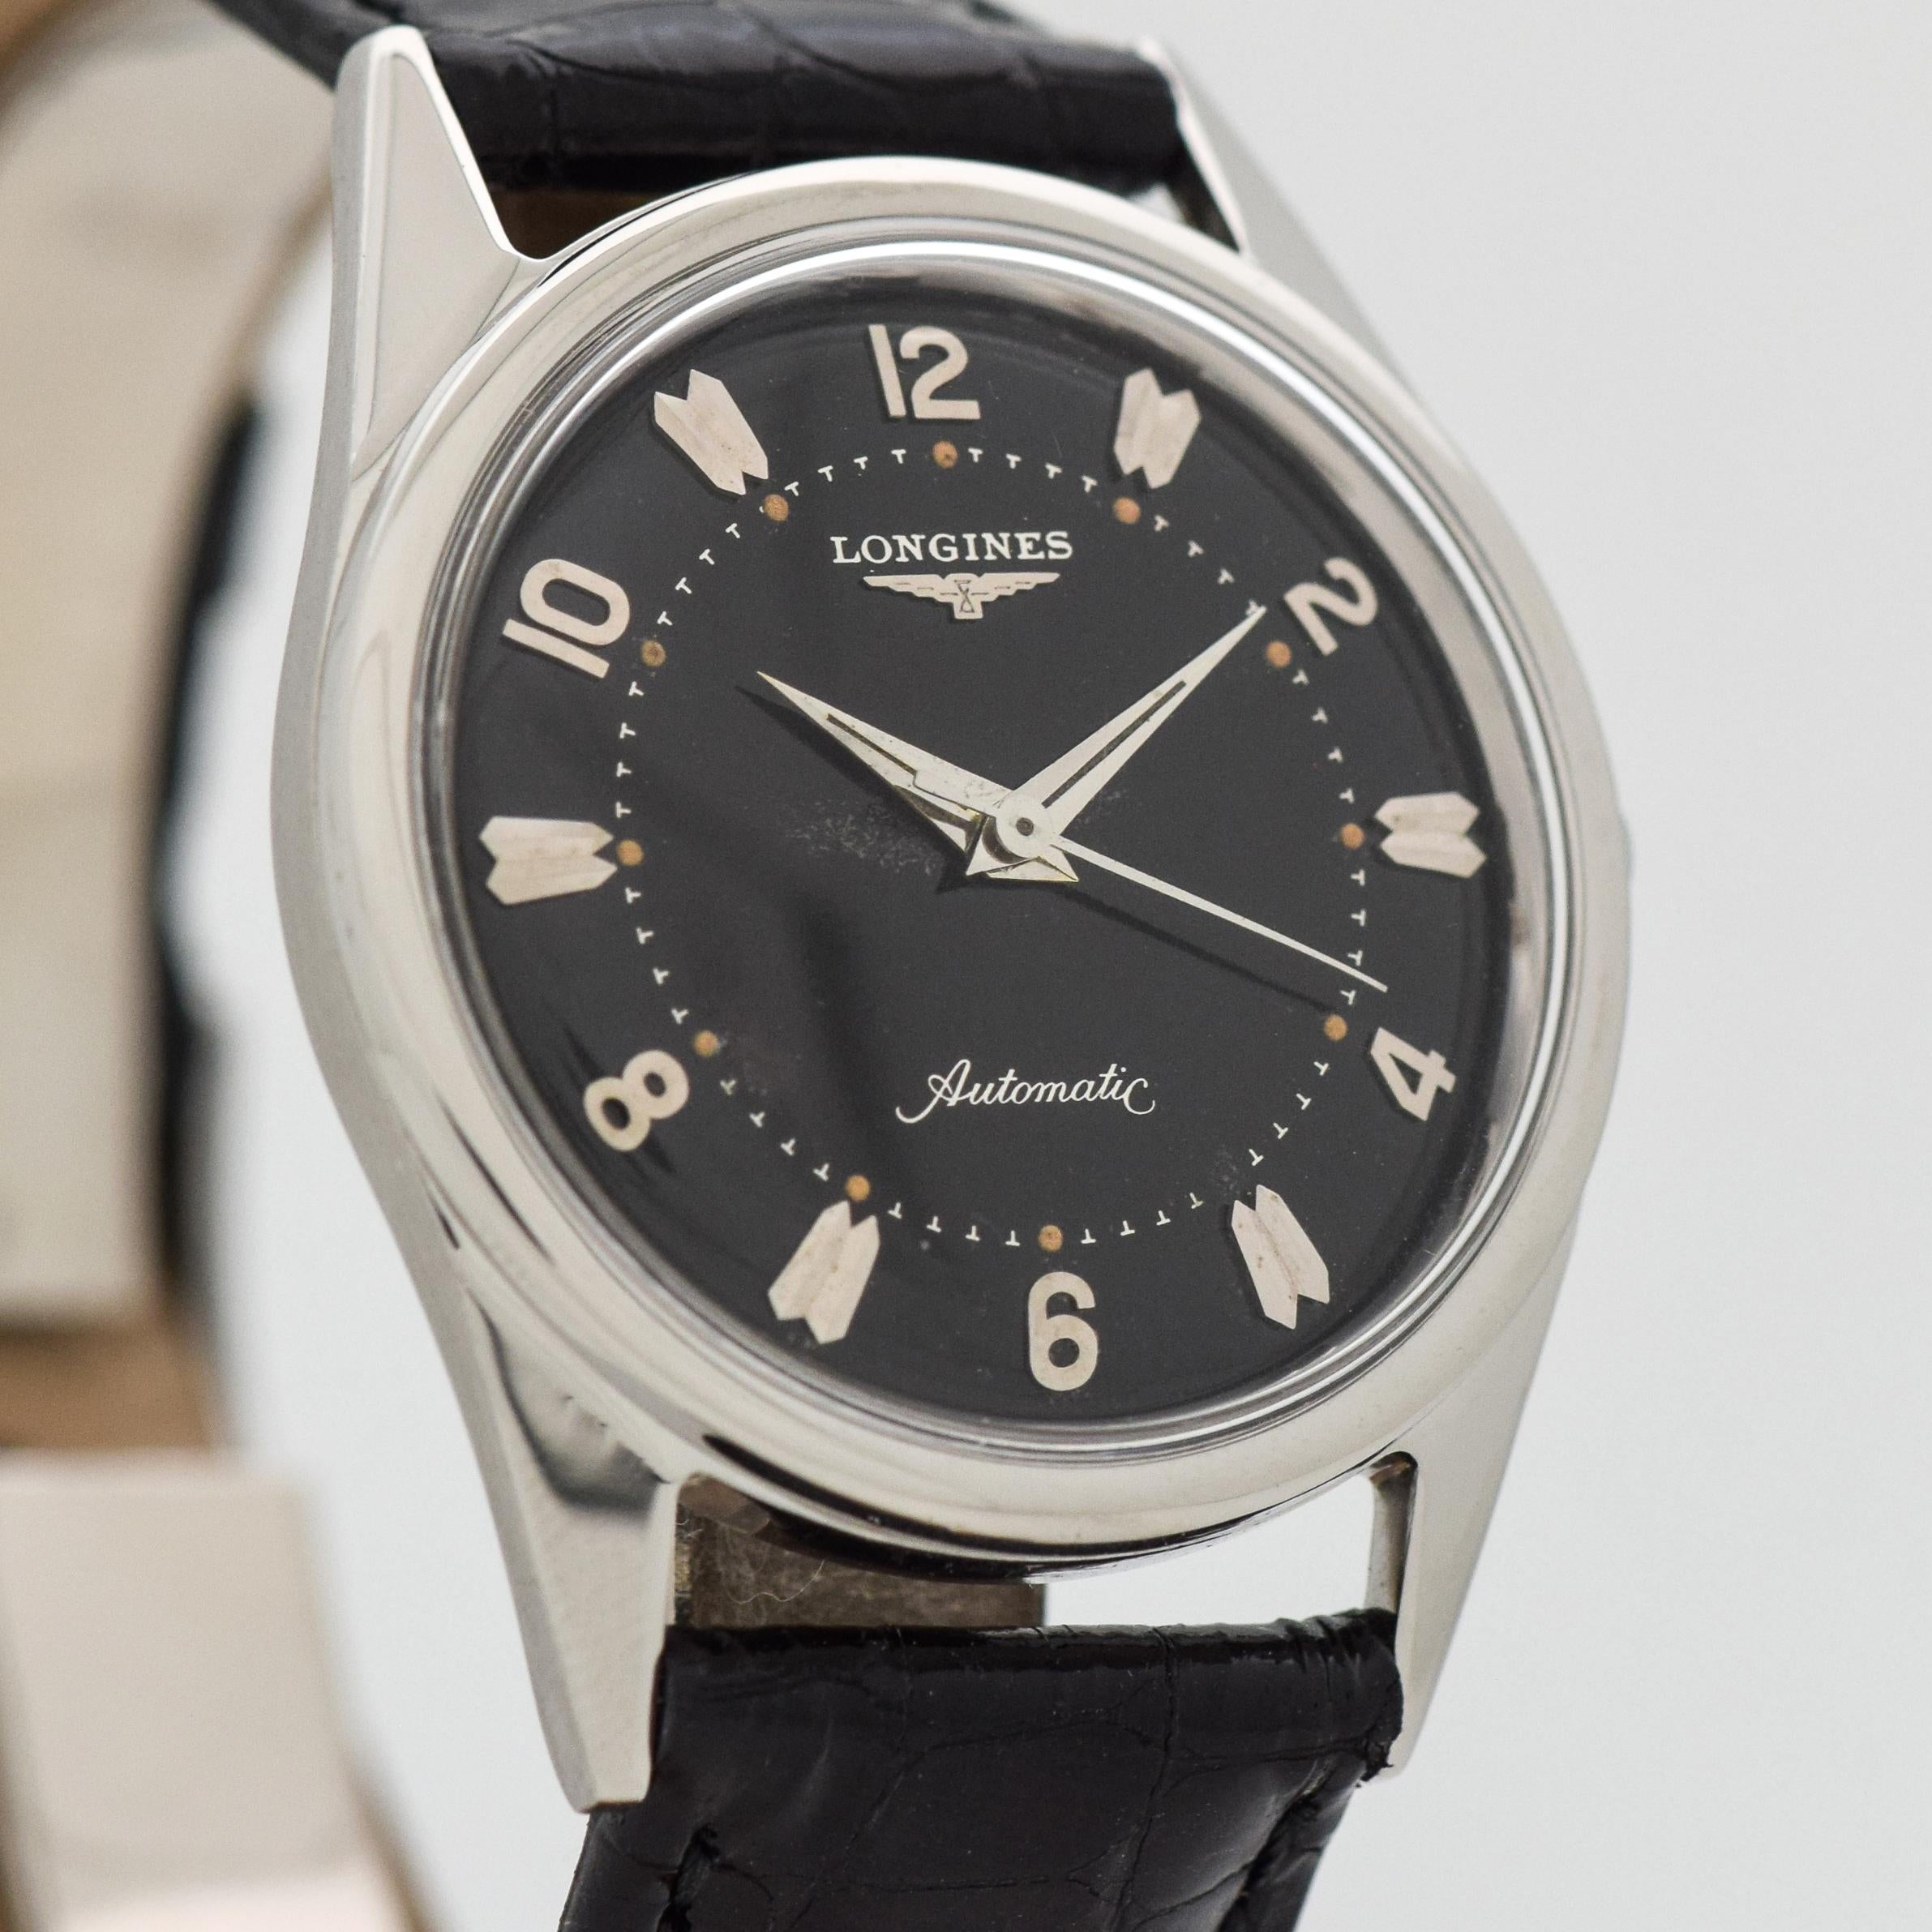 1958 Vintage Longines Ref. 2309-SW Stainless Steel watch with Original Black Dial with Applied Steel Arabic Even Numbers with Tapered Pointed Ends Beveled Double Bar Markers. 32mm x 41mm lug to lug (1.26 in. x 1.61 in.) - 17 jewel, manual caliber